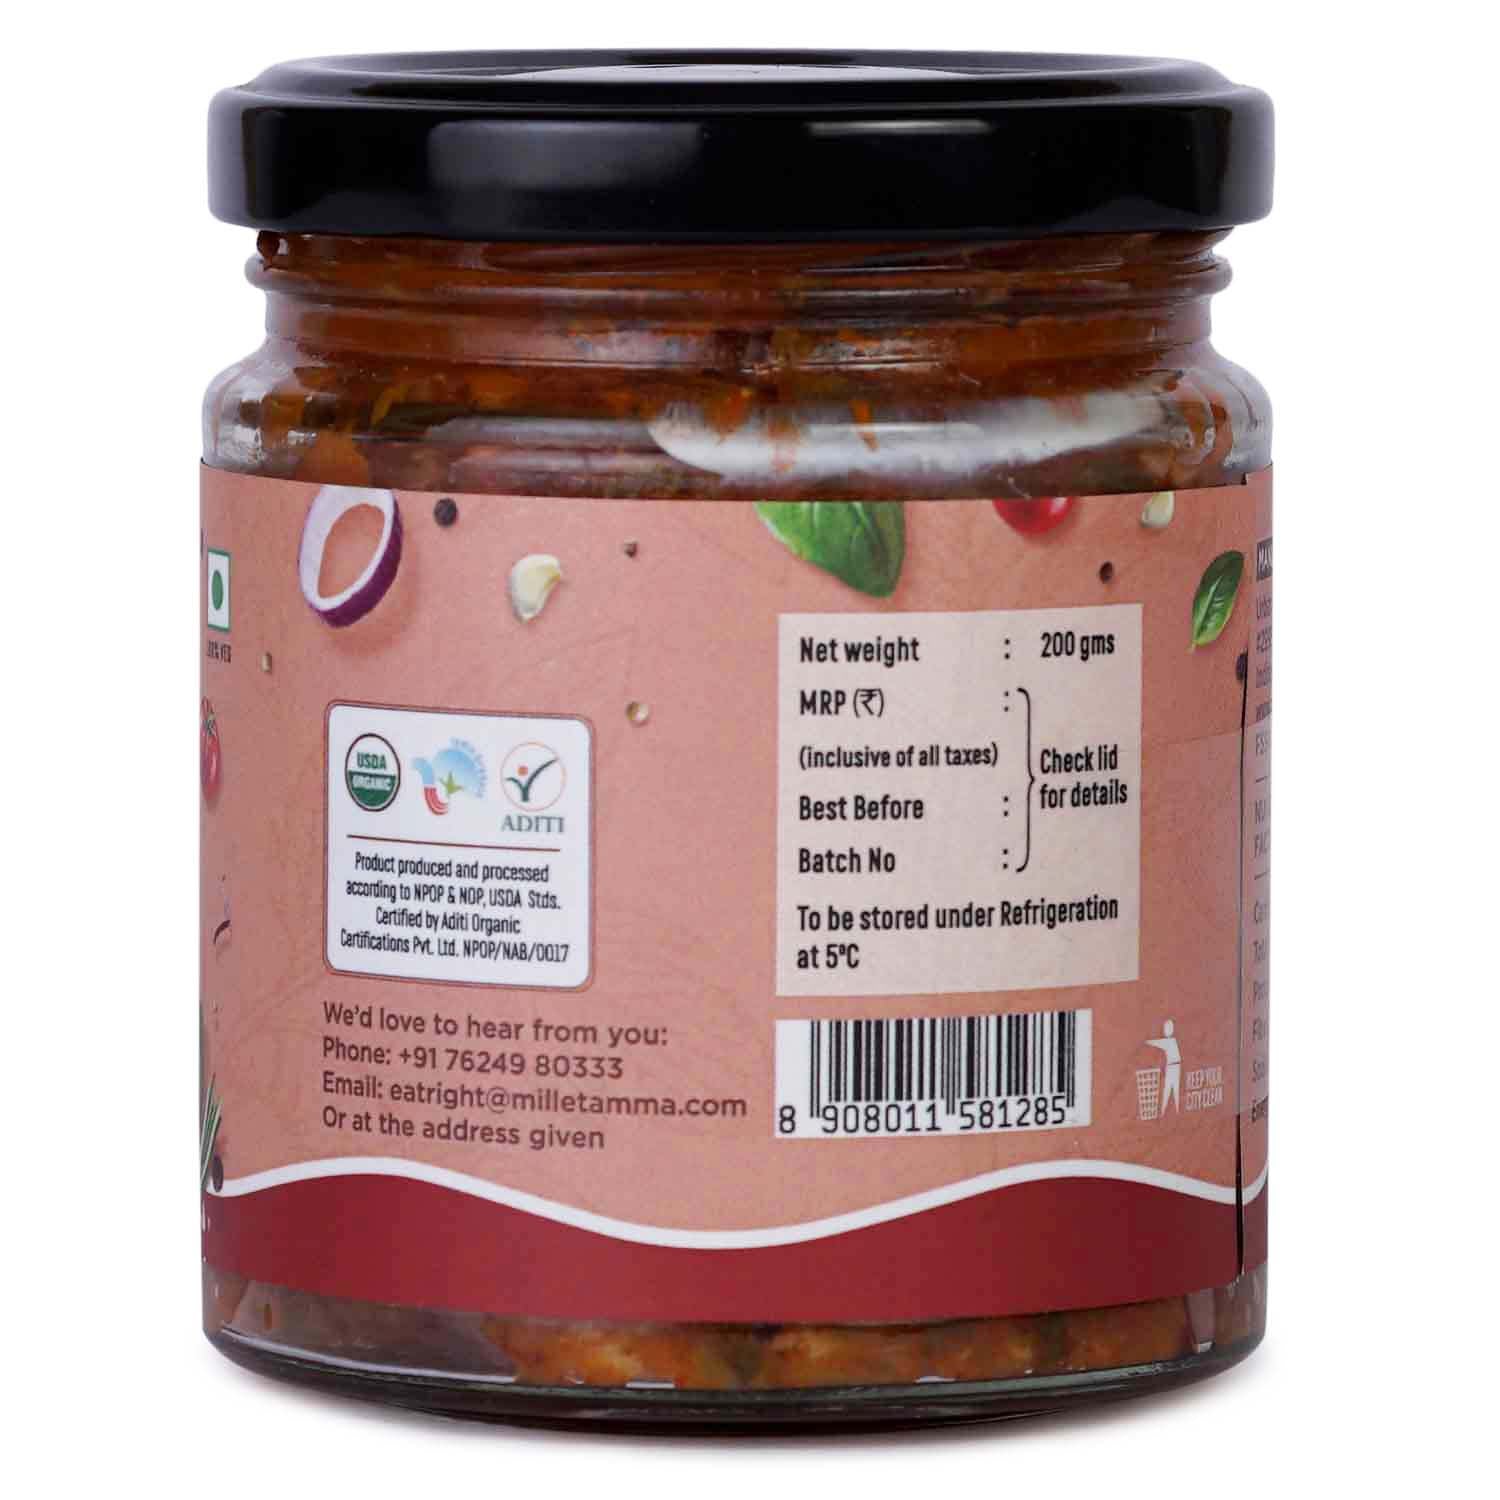 Millet Amma’s Pizza Pasta Sauce- A delicious Organic Pizza and Pasta Sauce that gives your dish a delicious Italian taste.  Made from Tomatoes, Spices and Capsicum this sauce has a great balance of flavors and a chunky spreadable consistency.  What’s more you can use this sauce to whip up a delicious pasta in minutes.